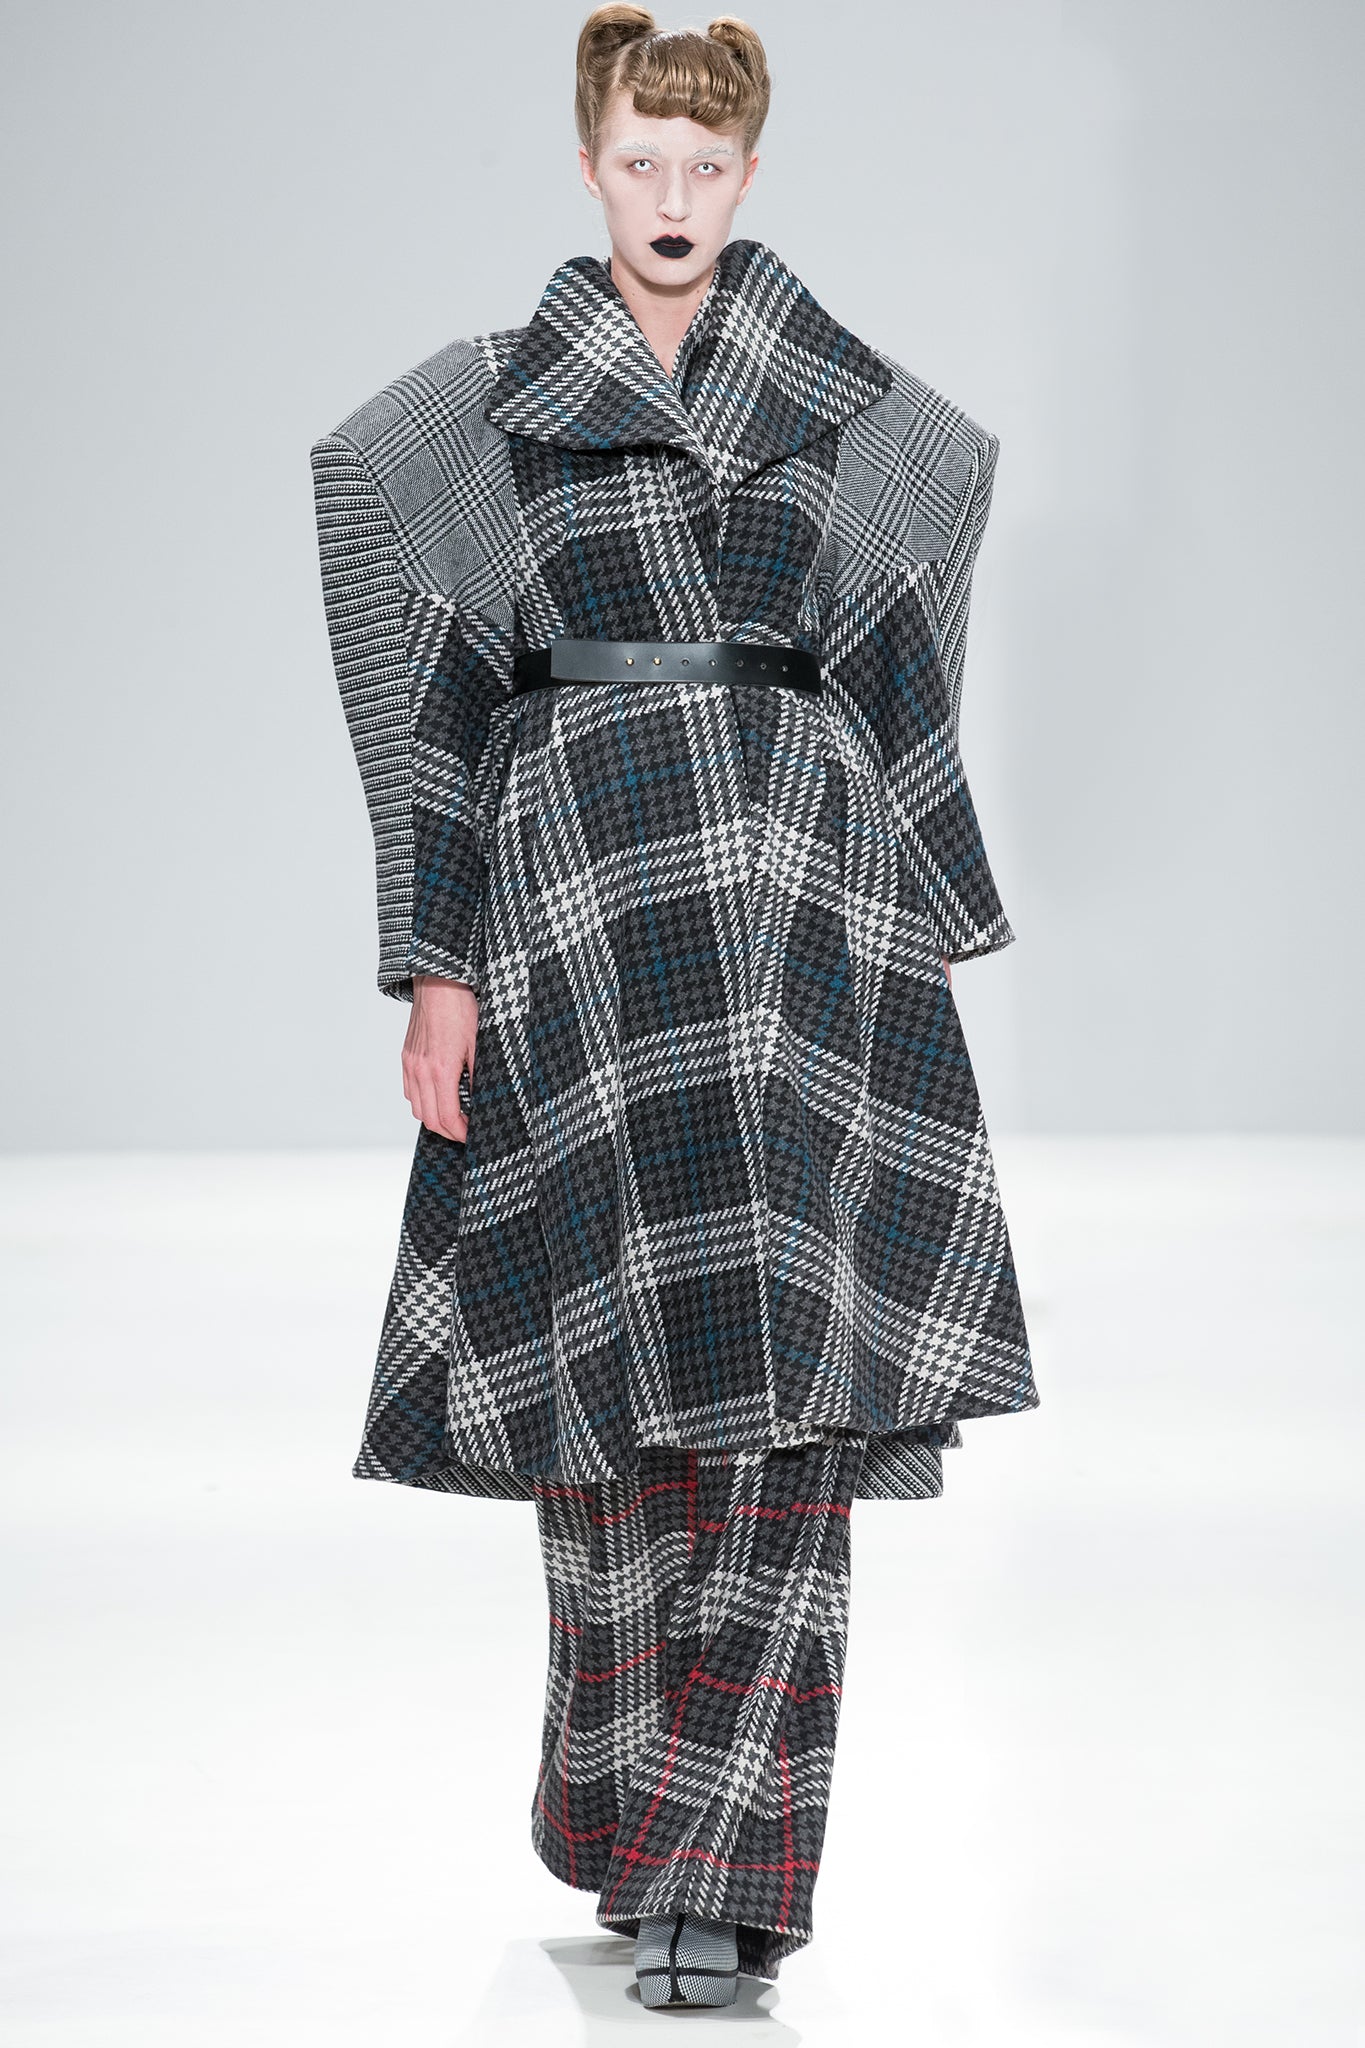 CIMONE's 'Extra' coat created in a mix of check wools. Beautiful belted or unbelted, with an elegant 'floating' collar design. A signature style for AW17-18, first shown on the fashion scout catwalk at London Fashion Week.  